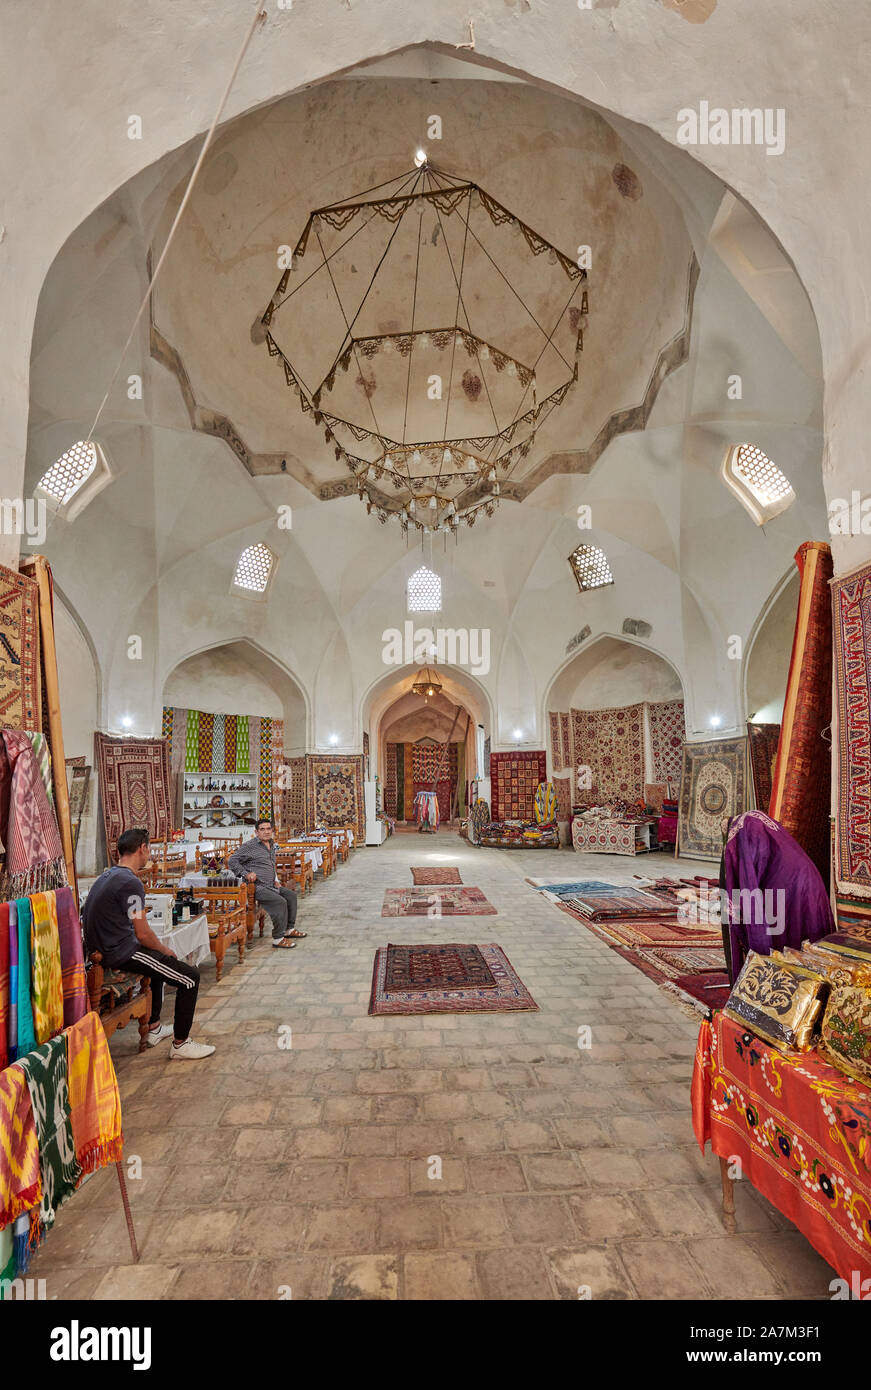 carpets inside Tim-Abdullakhan Bazaar, Ancient Trading Dome in Bukhara, Uzbekistan, Central Asia Stock Photo